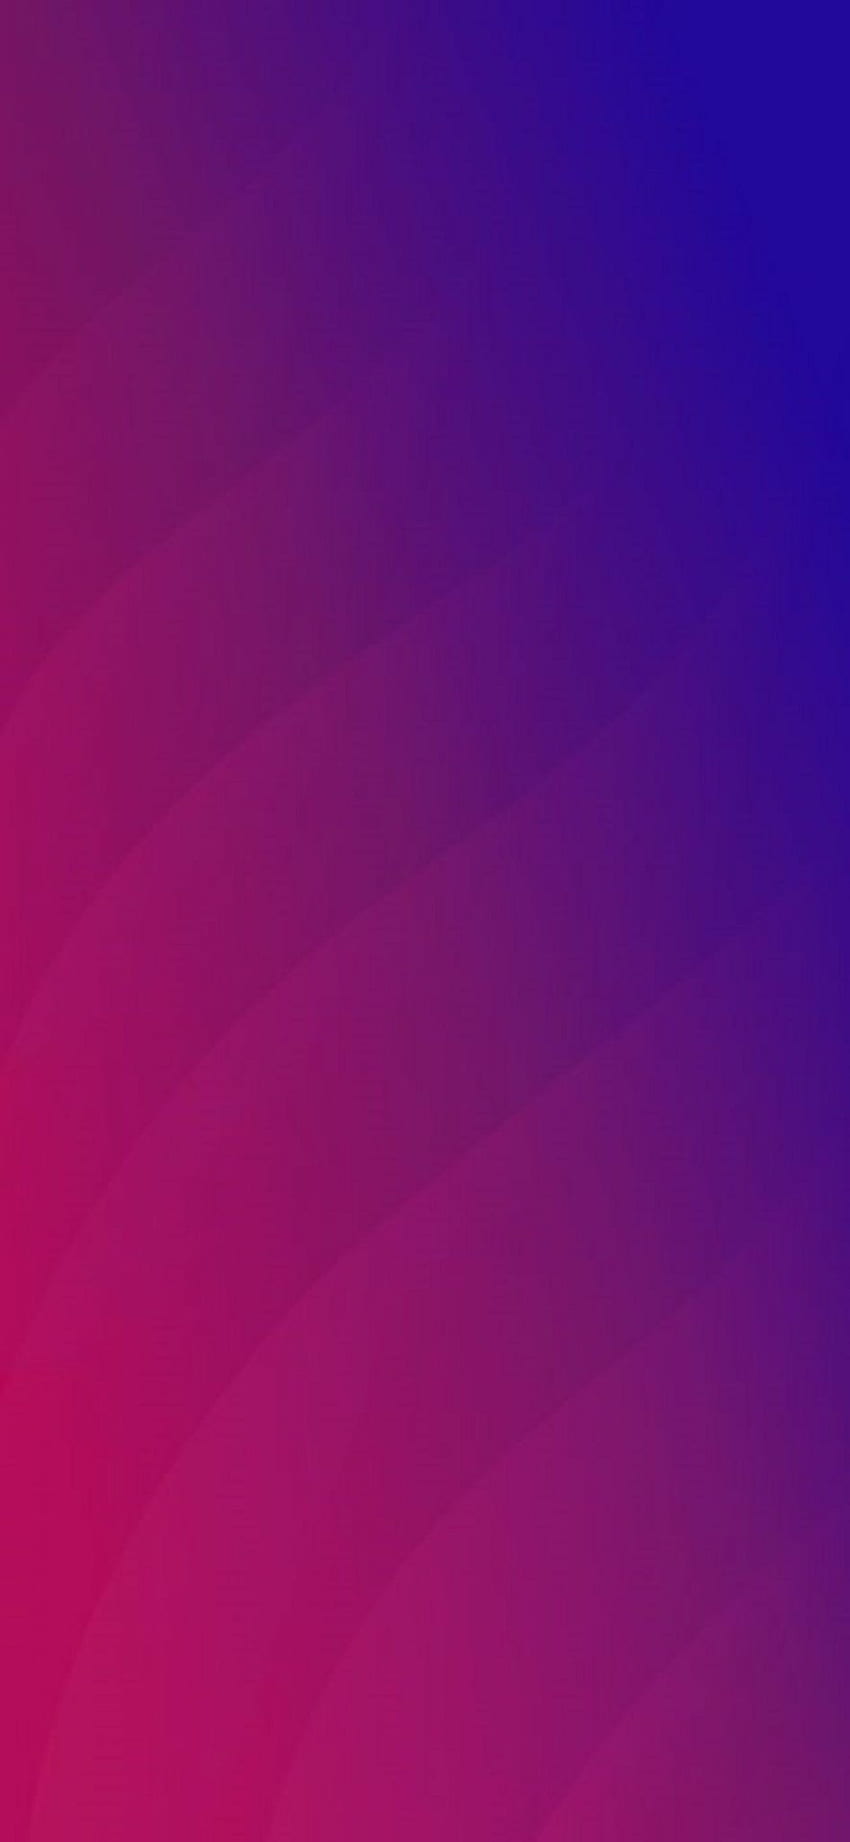 Oppo Find X Stock - ZIP File Included, Oppo Original HD phone wallpaper